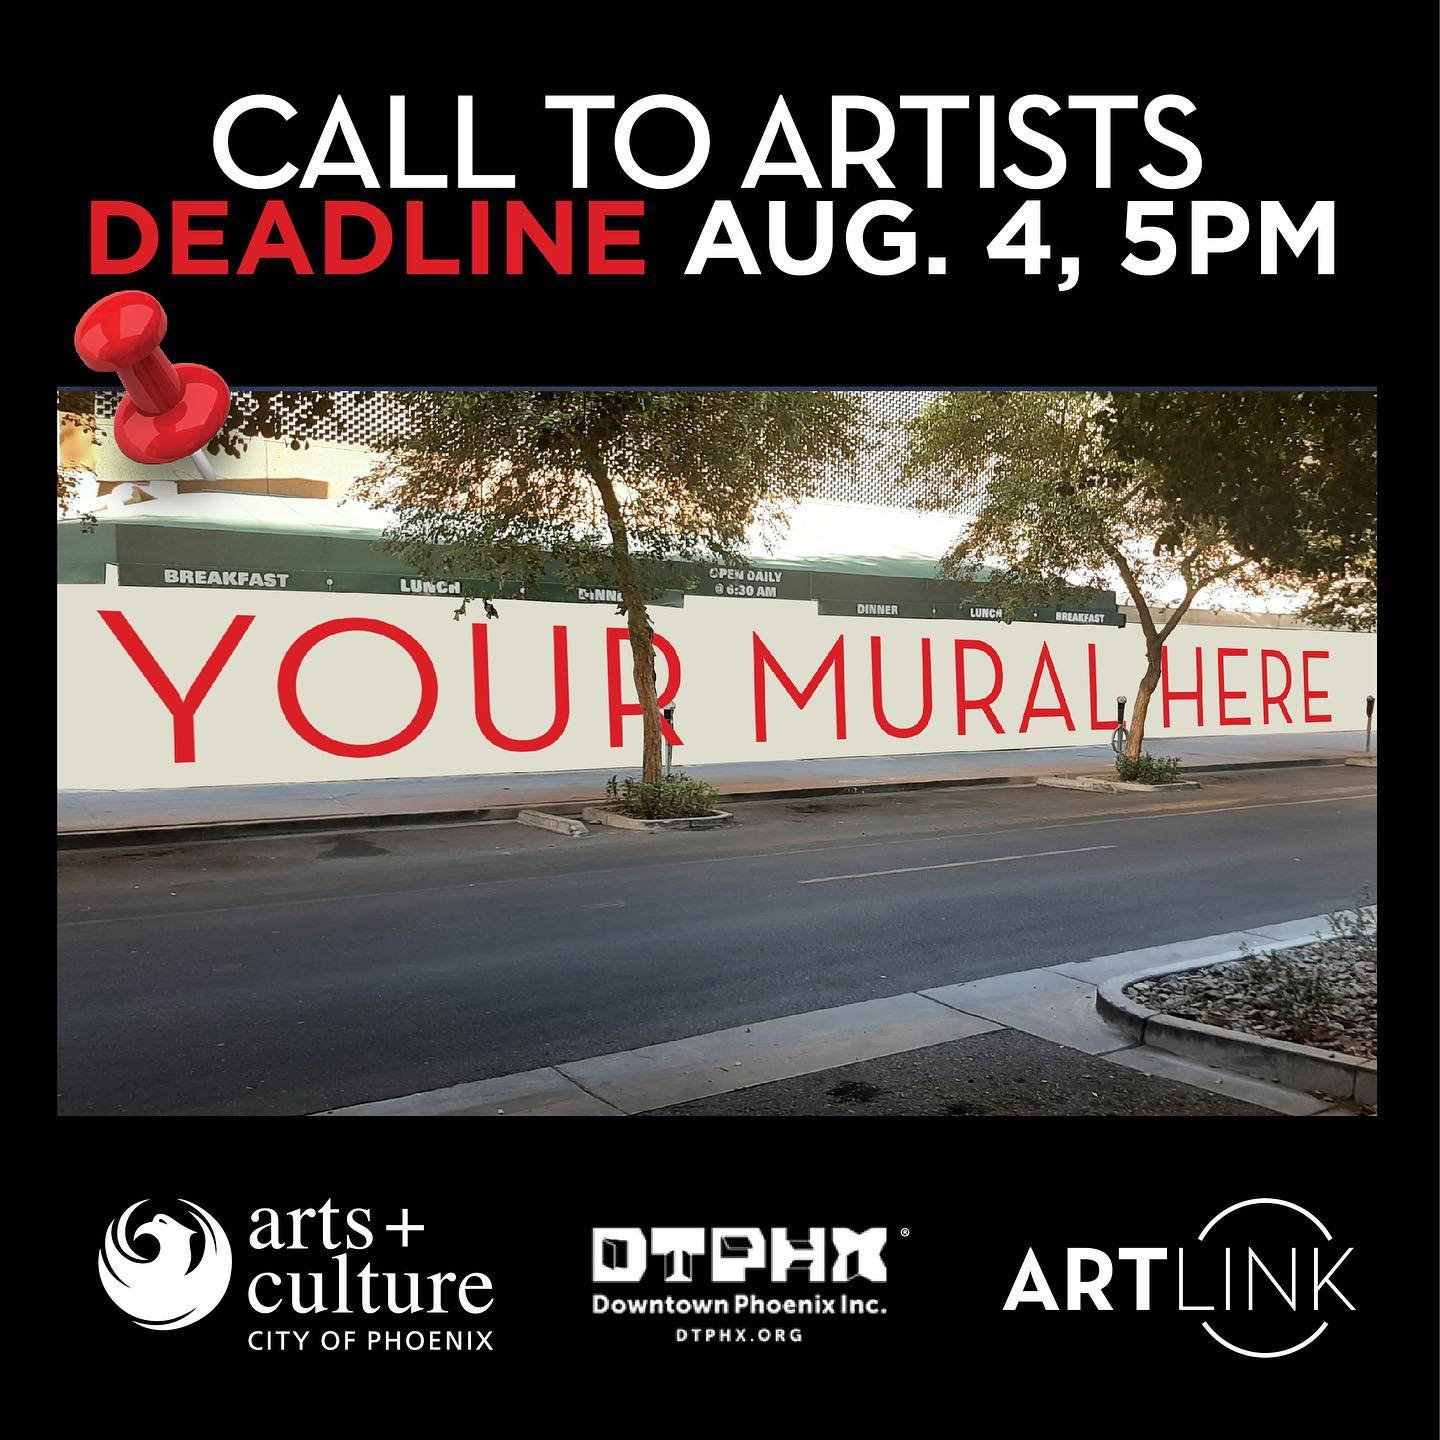 A big REMINDER (DEADLINE is this THURSDAY!!! August 4th) City of Phoenix Office of Arts and Culture and Downtown Phoenix Inc. have put out a call to Phoenix-based artists to create a nearly city-block wide mural that celebrates Phoenix! LETS GO!!! 
🎉 🎨 🏙 
Over the next few years, Phoenix is hosting major city-wide events, including Super Bowl LVII festivities, the NCAA Final Four, and the NCAA Women's Final Four. Project partners want to celebrate Phoenix's culture and are incorporating a large-scale mural (190’ x 10’) intended to highlight and celebrate the diversity, culture, and vitality that makes all of Phoenix a great place to live, work, play and visit. 

Read the call and apply today! The deadline for submissions is August 4th, 5:00 p.m. MST ⚡️

Phoenix Welcome Mural: 
https://artlinkinc.submittable.com/submit